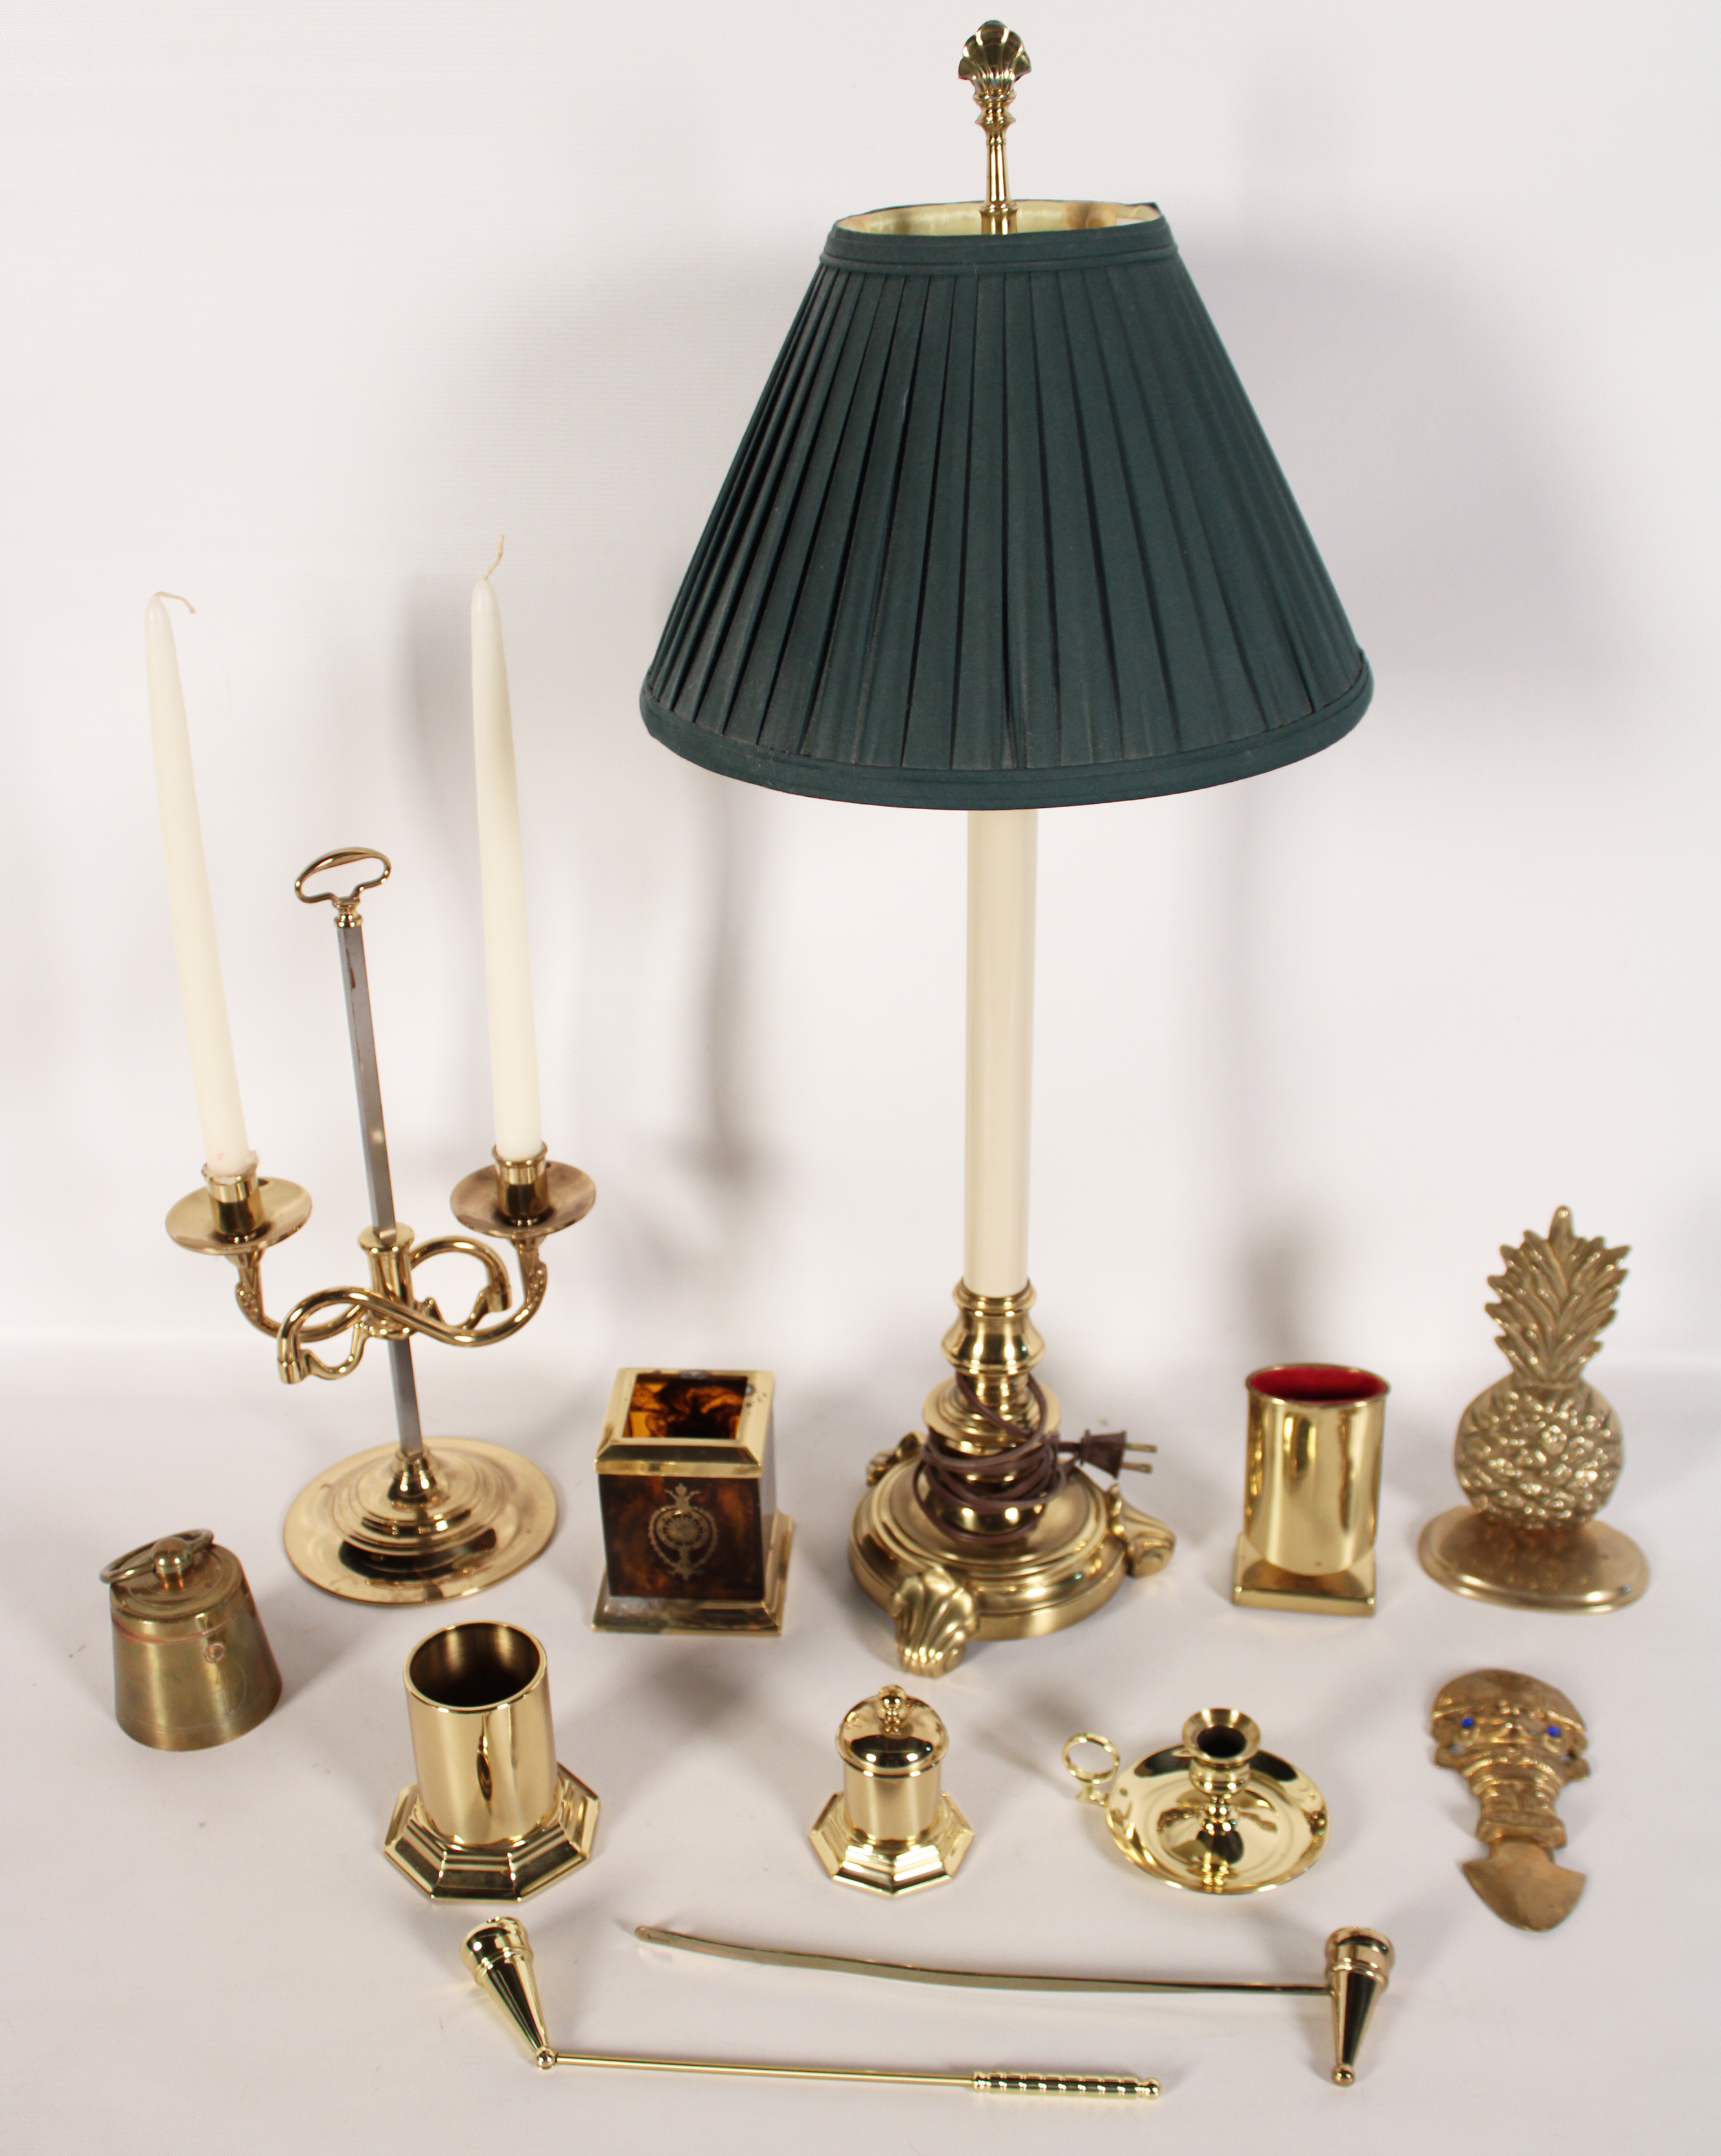 COLLECTION OF BRASS ITEMS COLLECTION